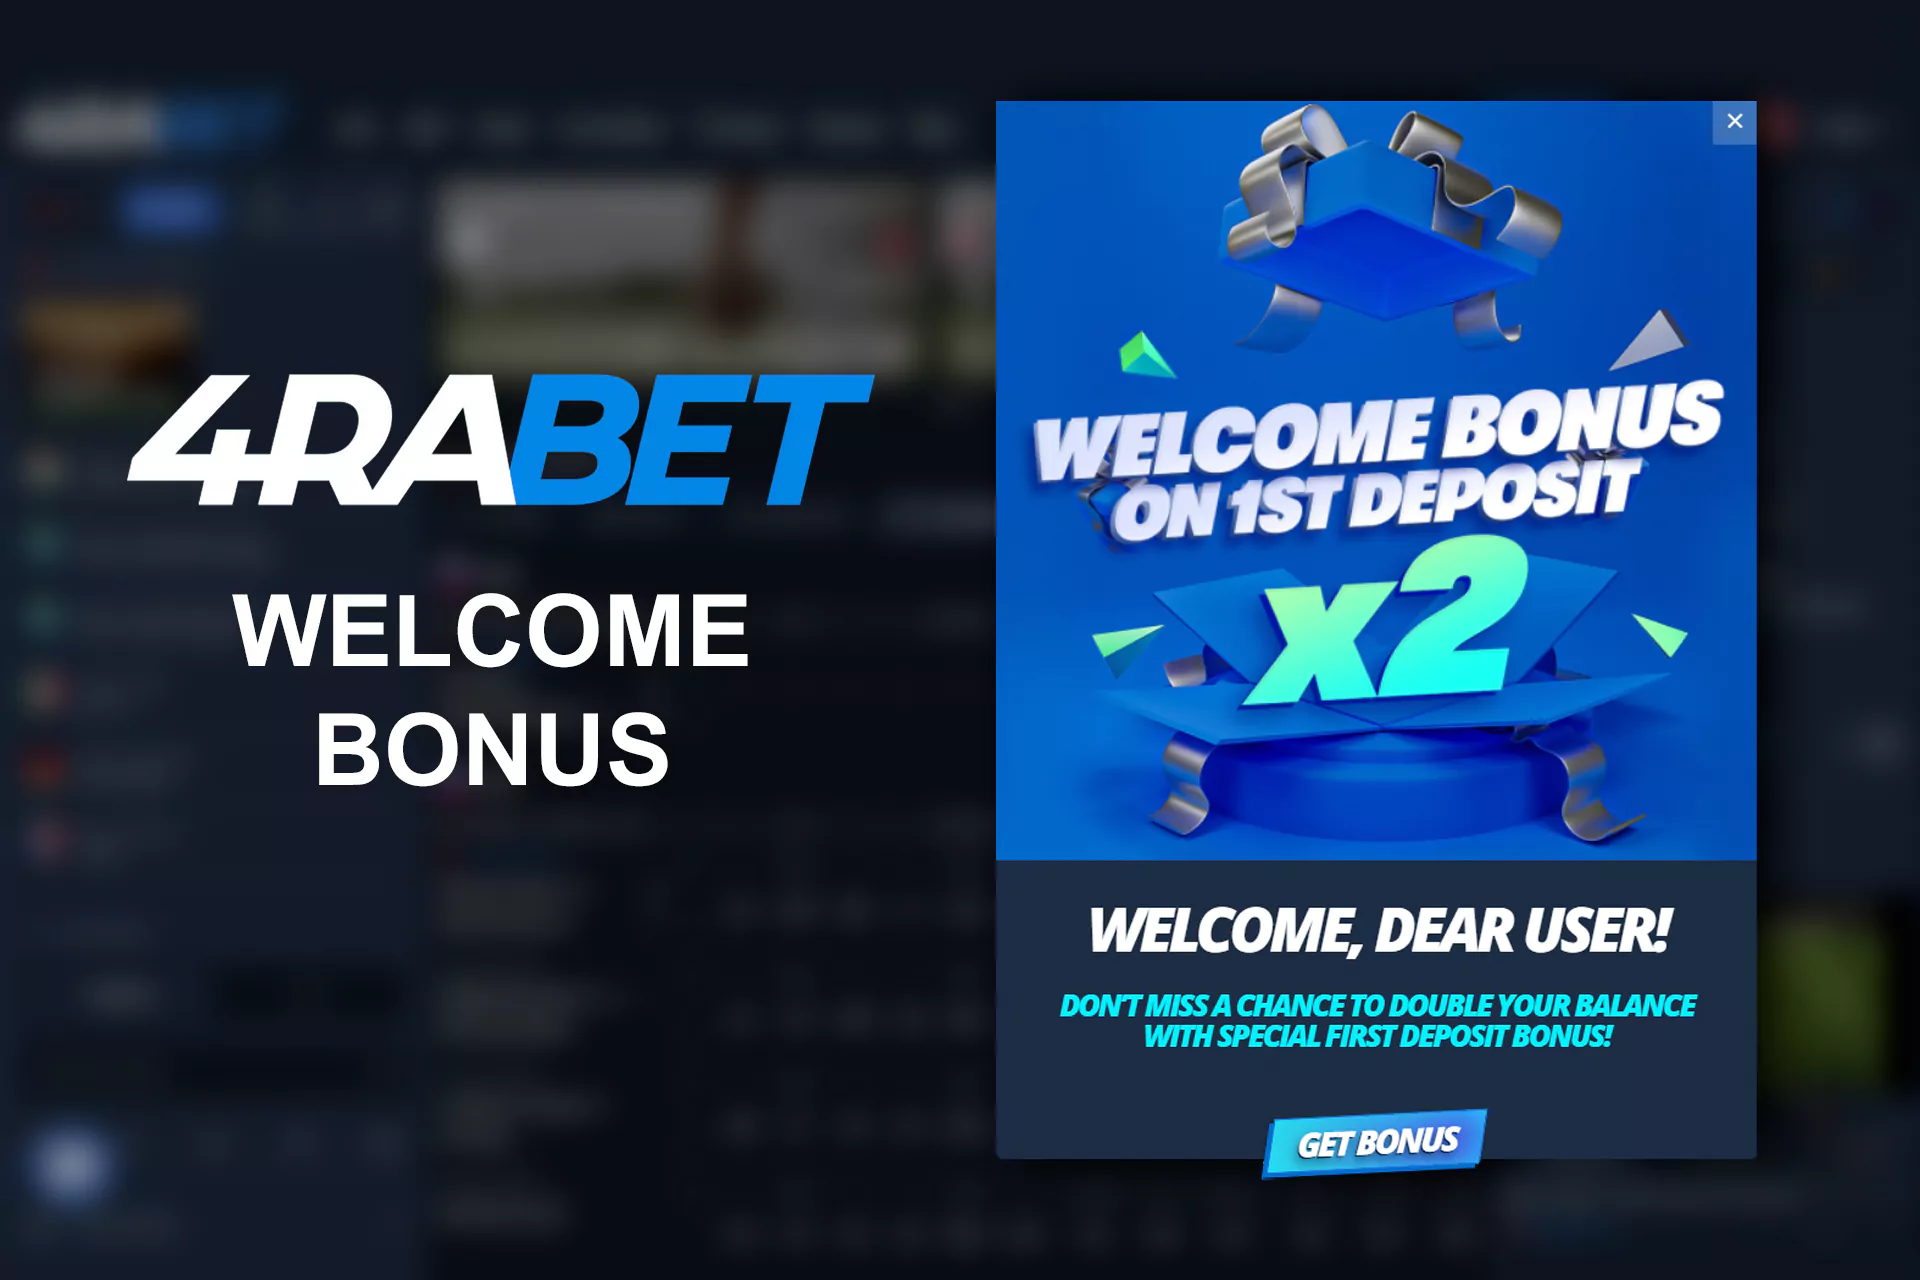 On the 4rabet new users can get the welcome bonus on the first deposit.